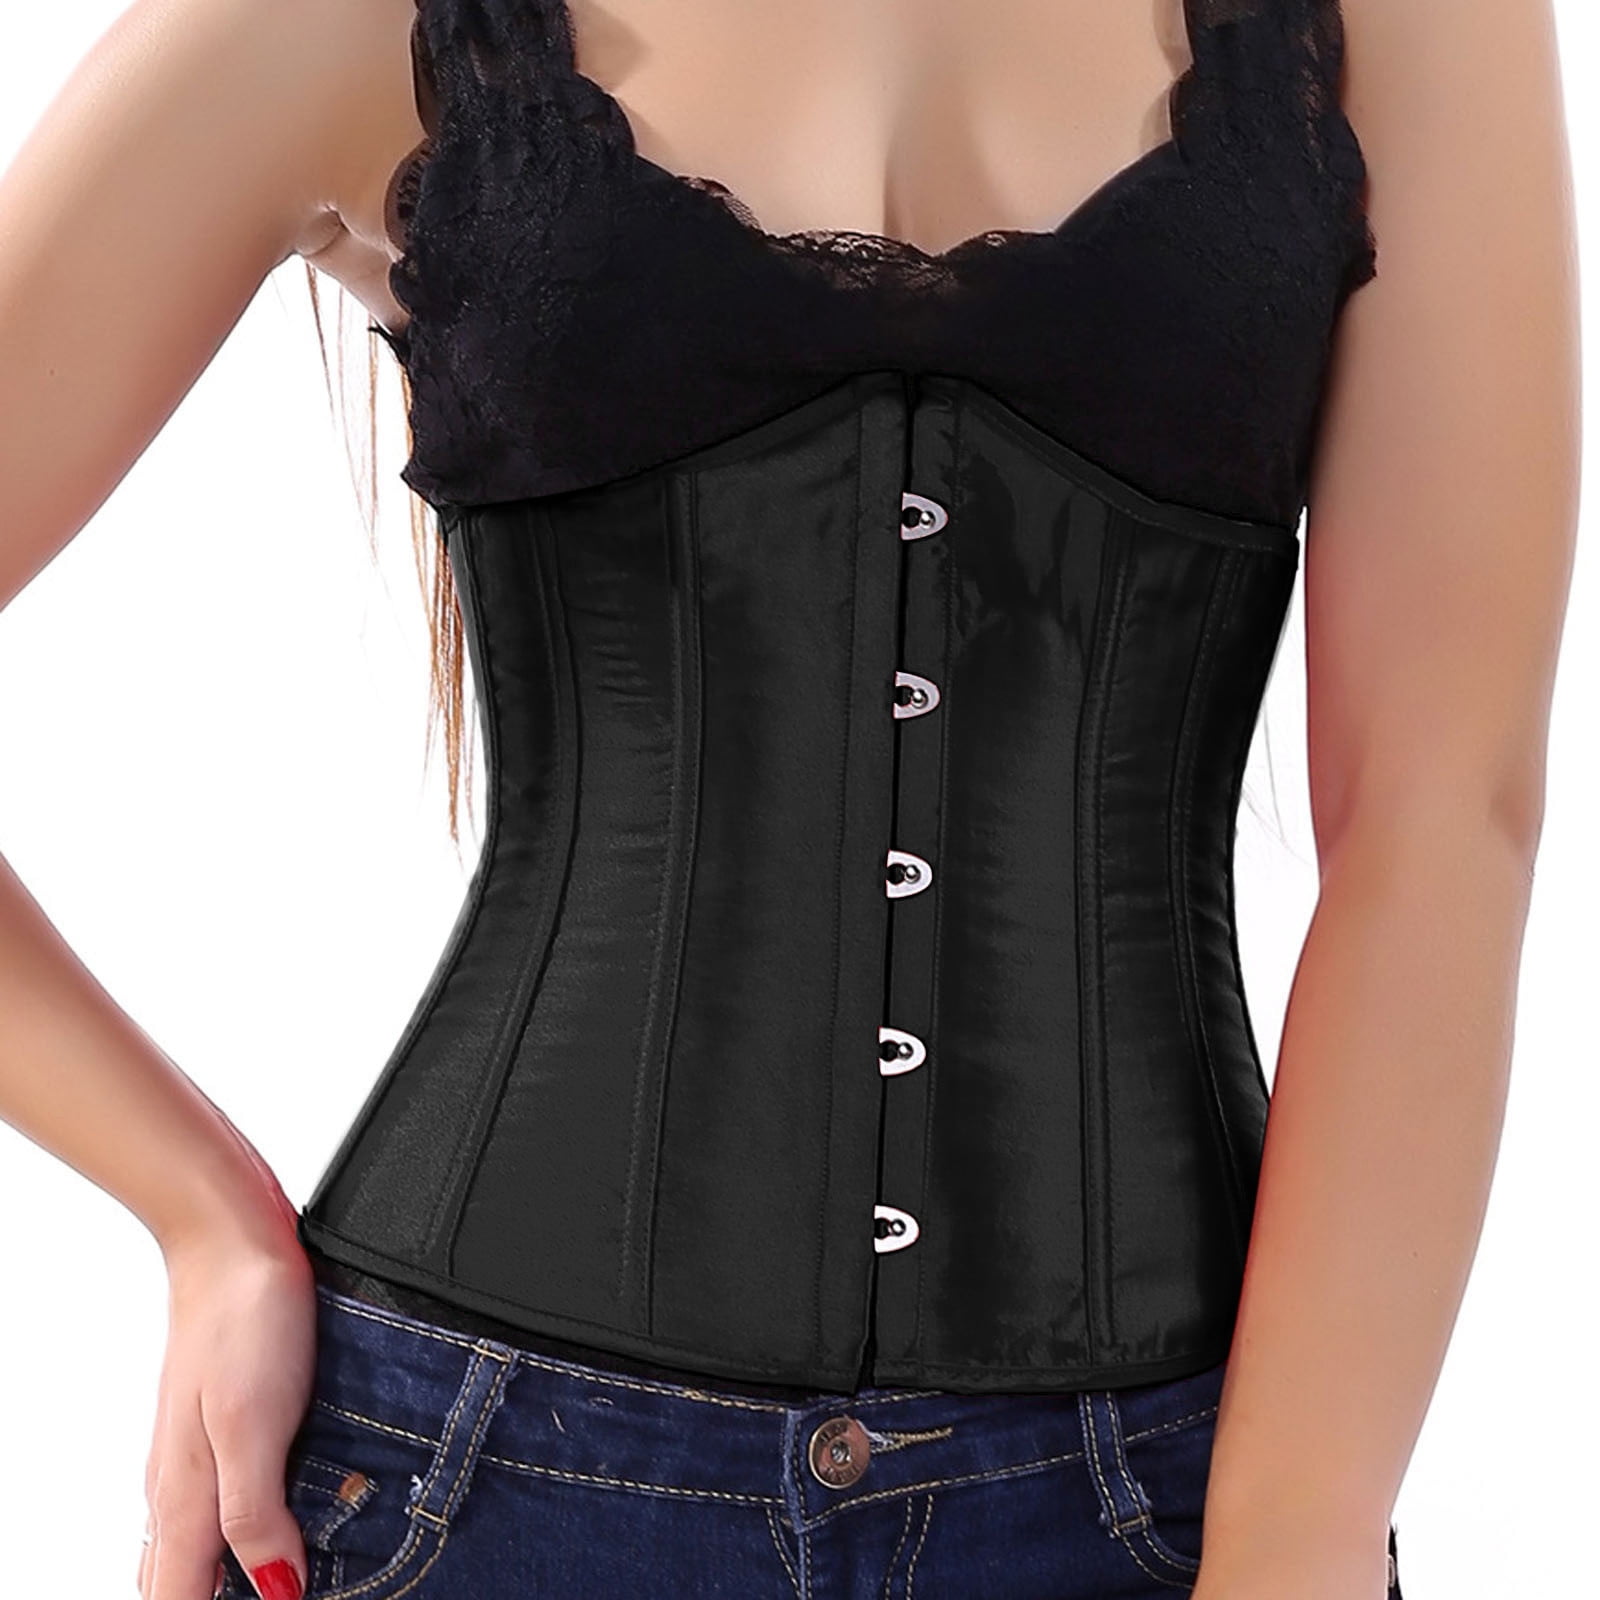 Corset Underbust Top Body Shaper for Wome Sexy Plus Size Fashion